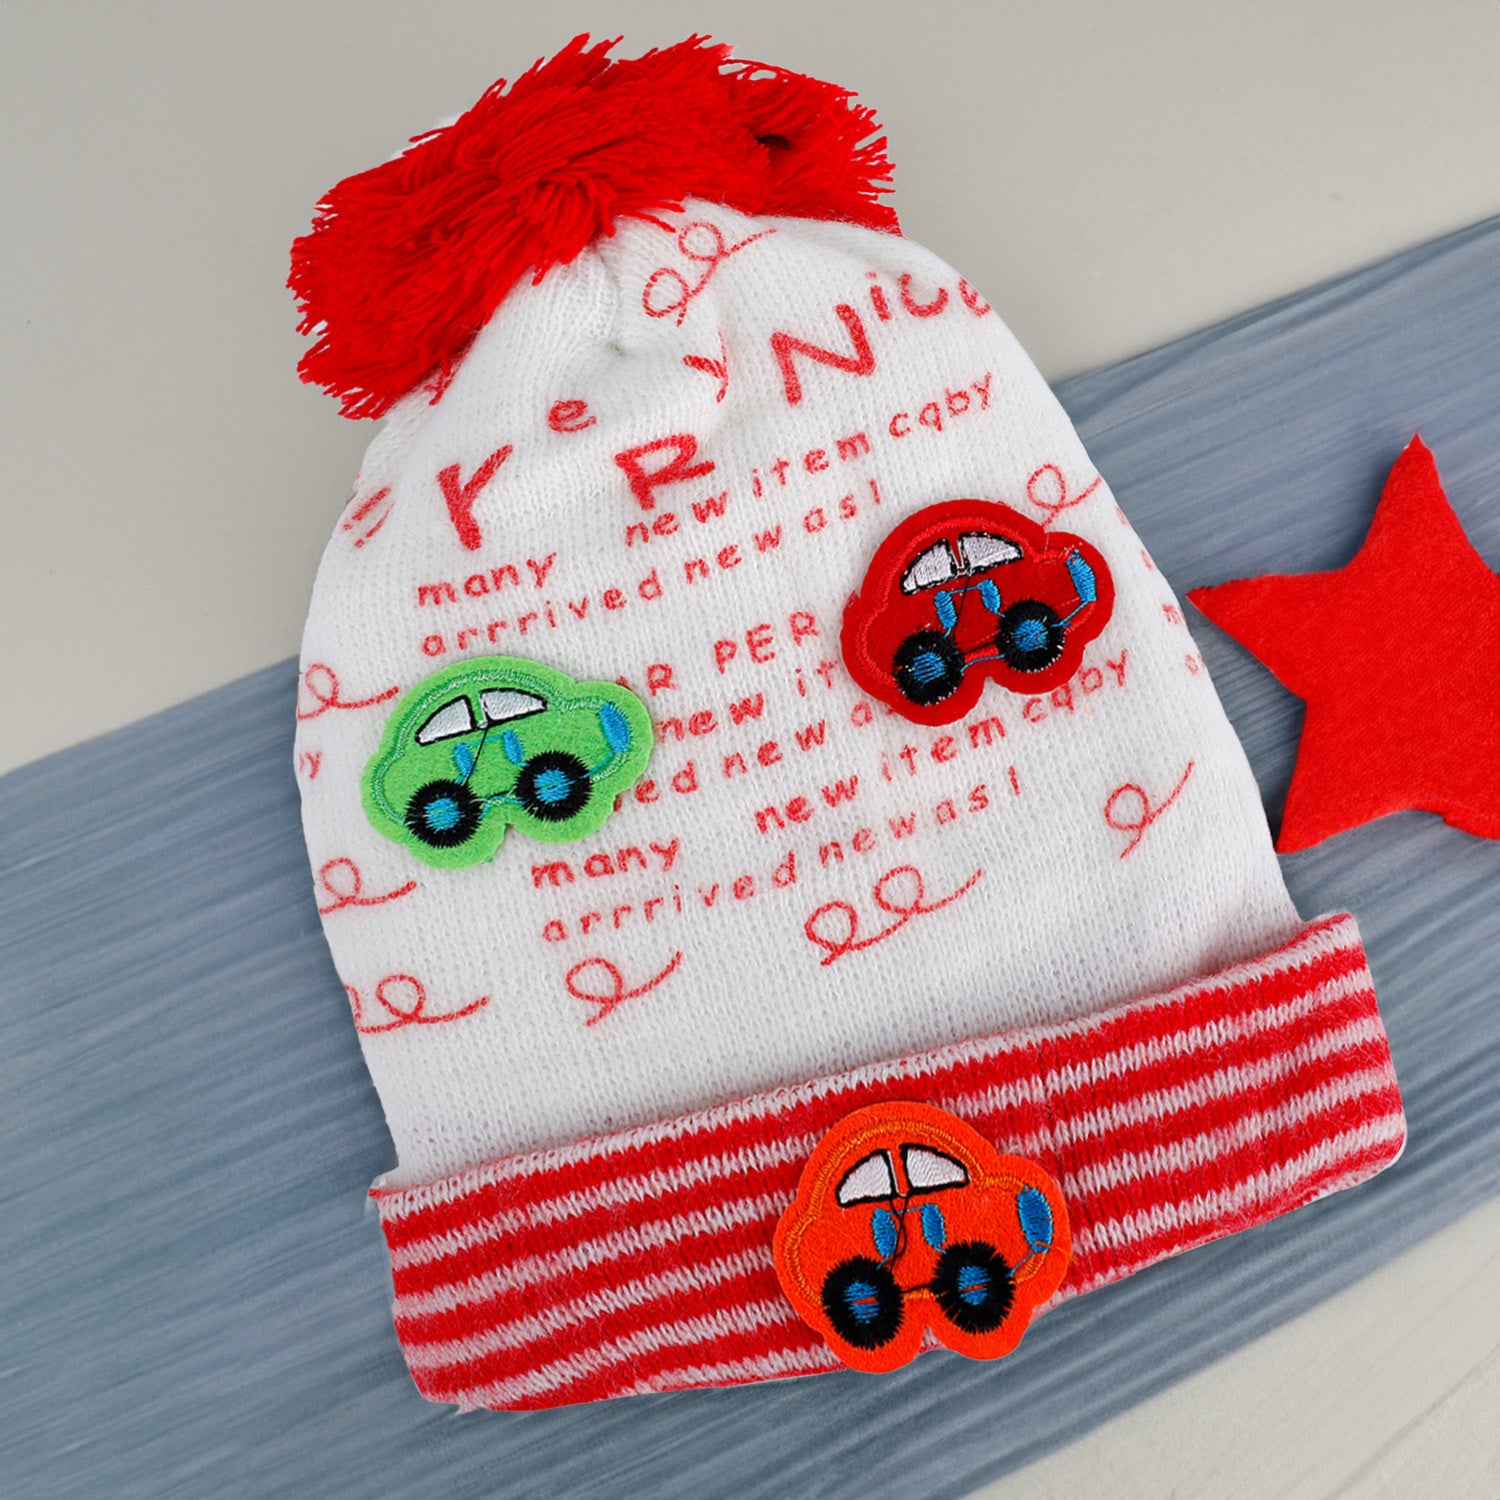 Baby Moo Car Pom Pom Breathable Beanie Warm Knitted Woollen Cap - Red